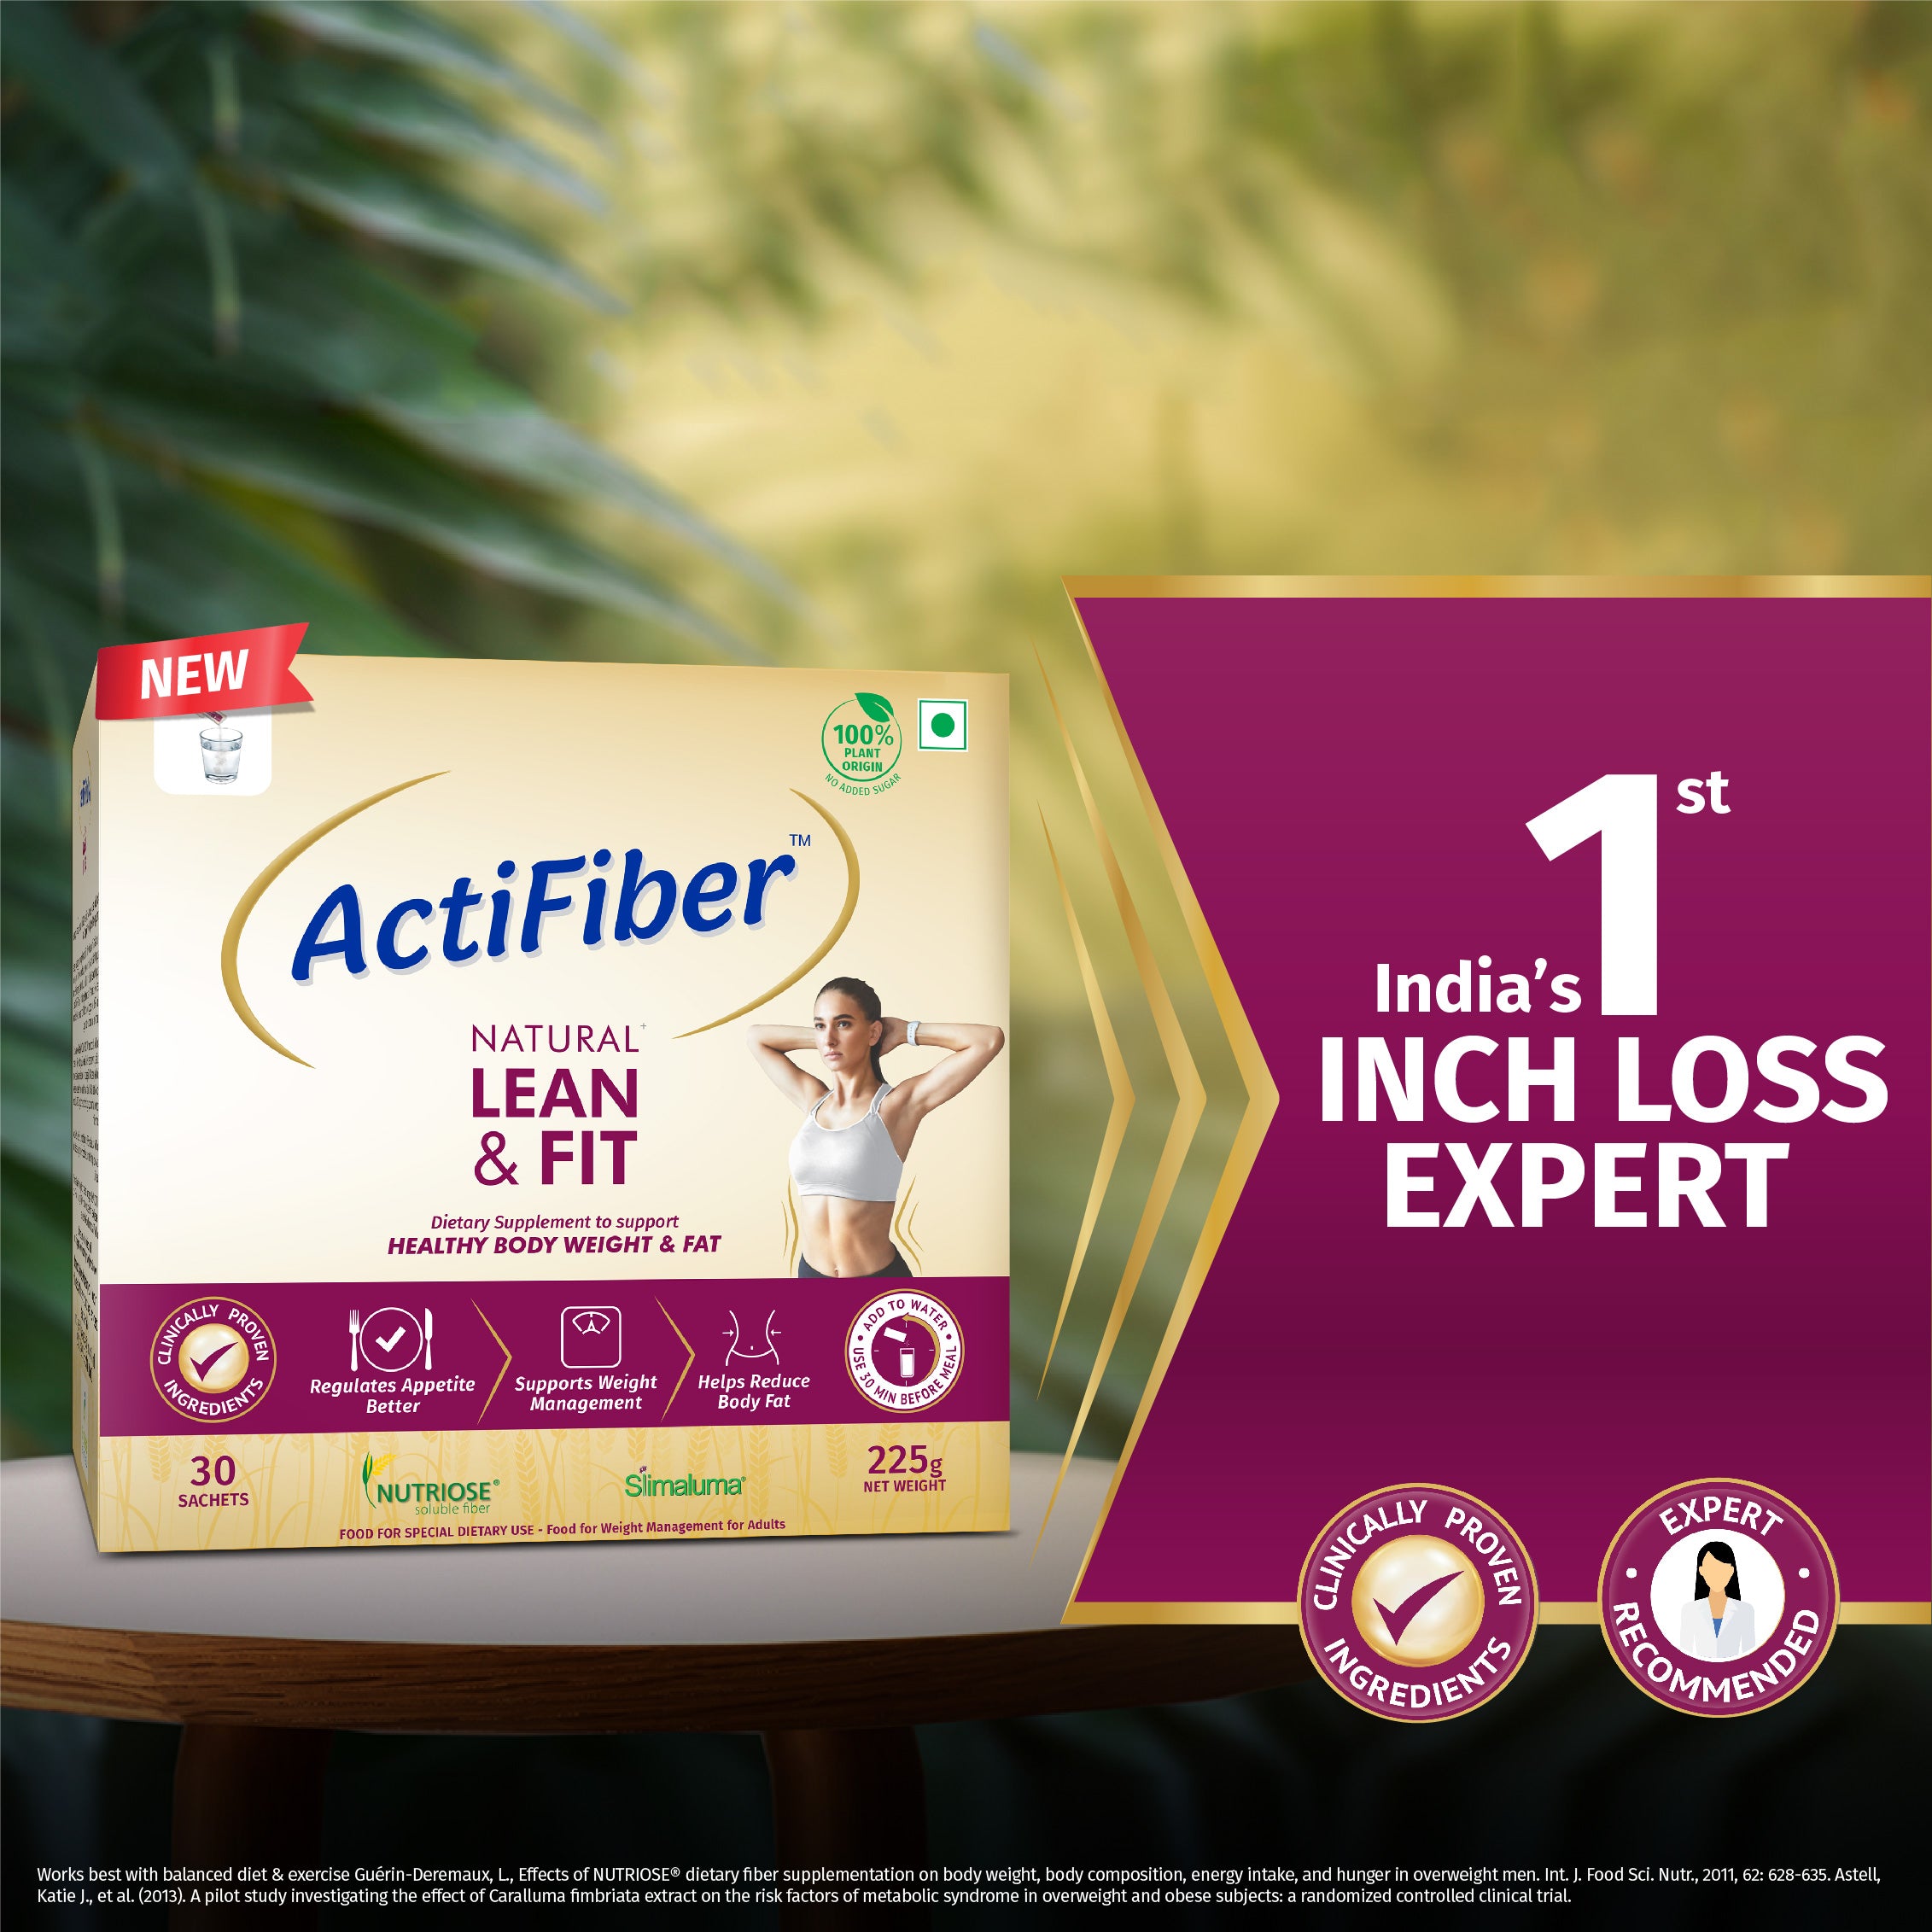 ActiFiber Natural Lean & Fit | Inch Loss Expert | Weight Loss & Fat Loss Supplement for Men & Women | Fat Loss from Stomach, Thigh, Hip | 100% Plant Origin & Safe | Expert Recommended | Clinically Proven Health Benefits